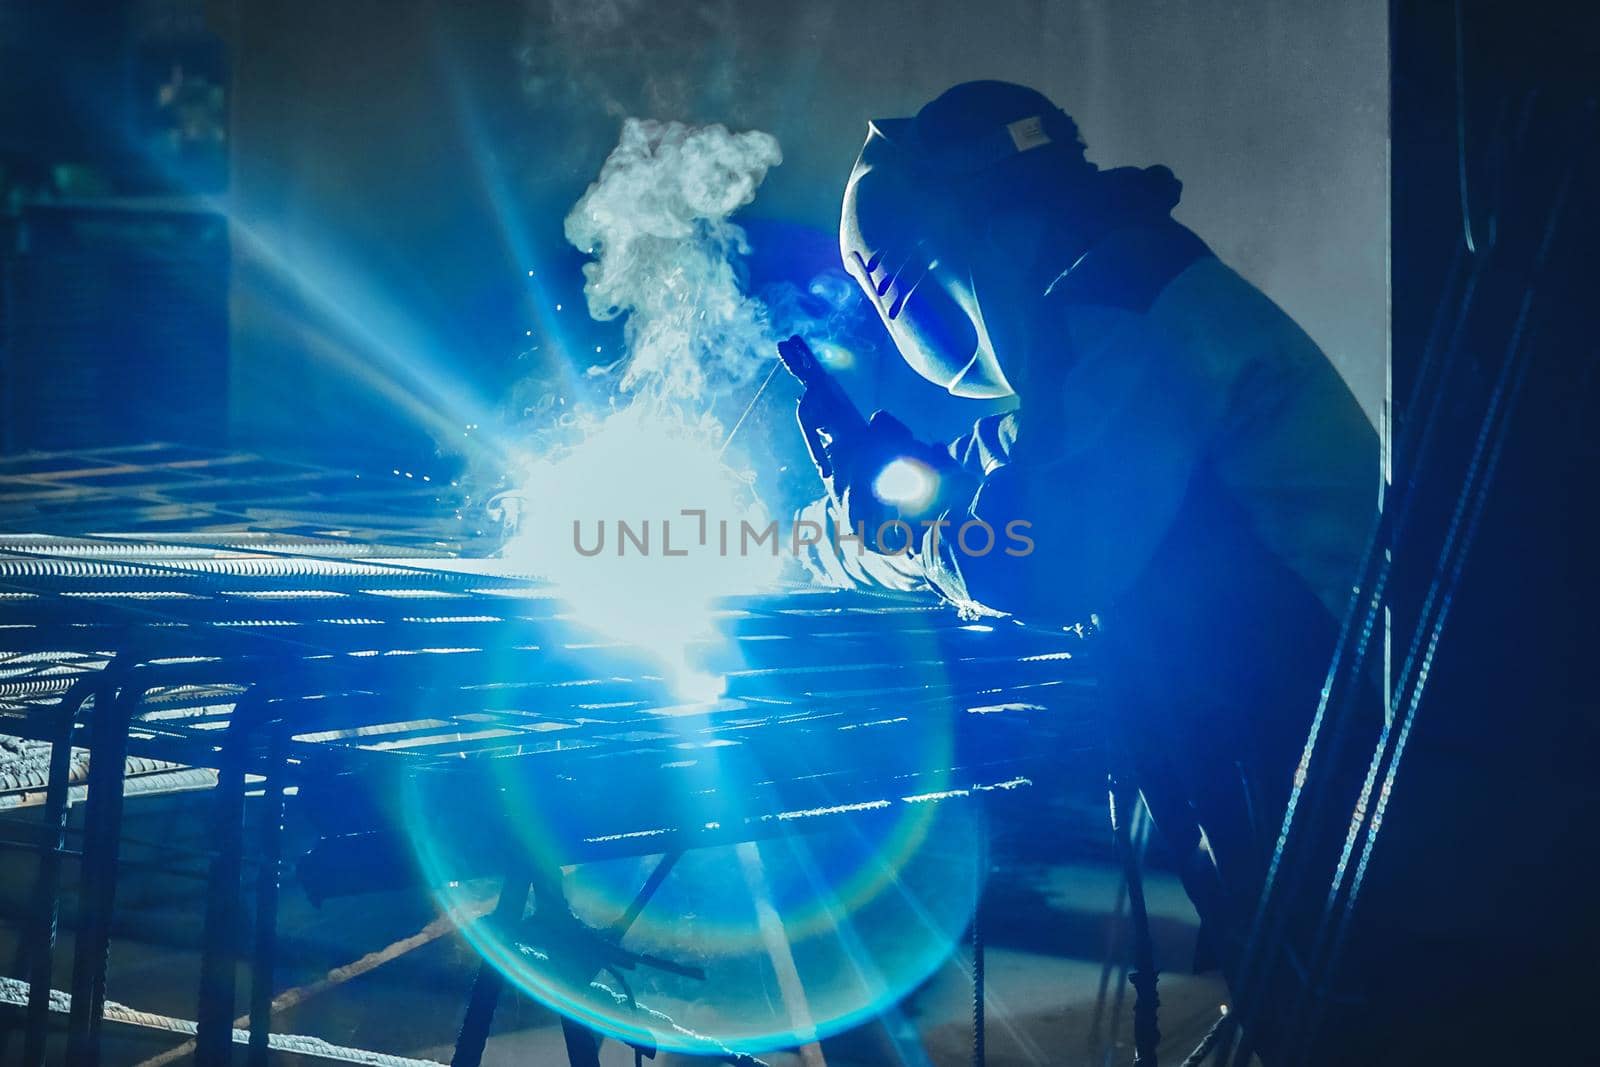 Working man is doing welding work on metal structures in a factory or industrial enterprise by AYDO8